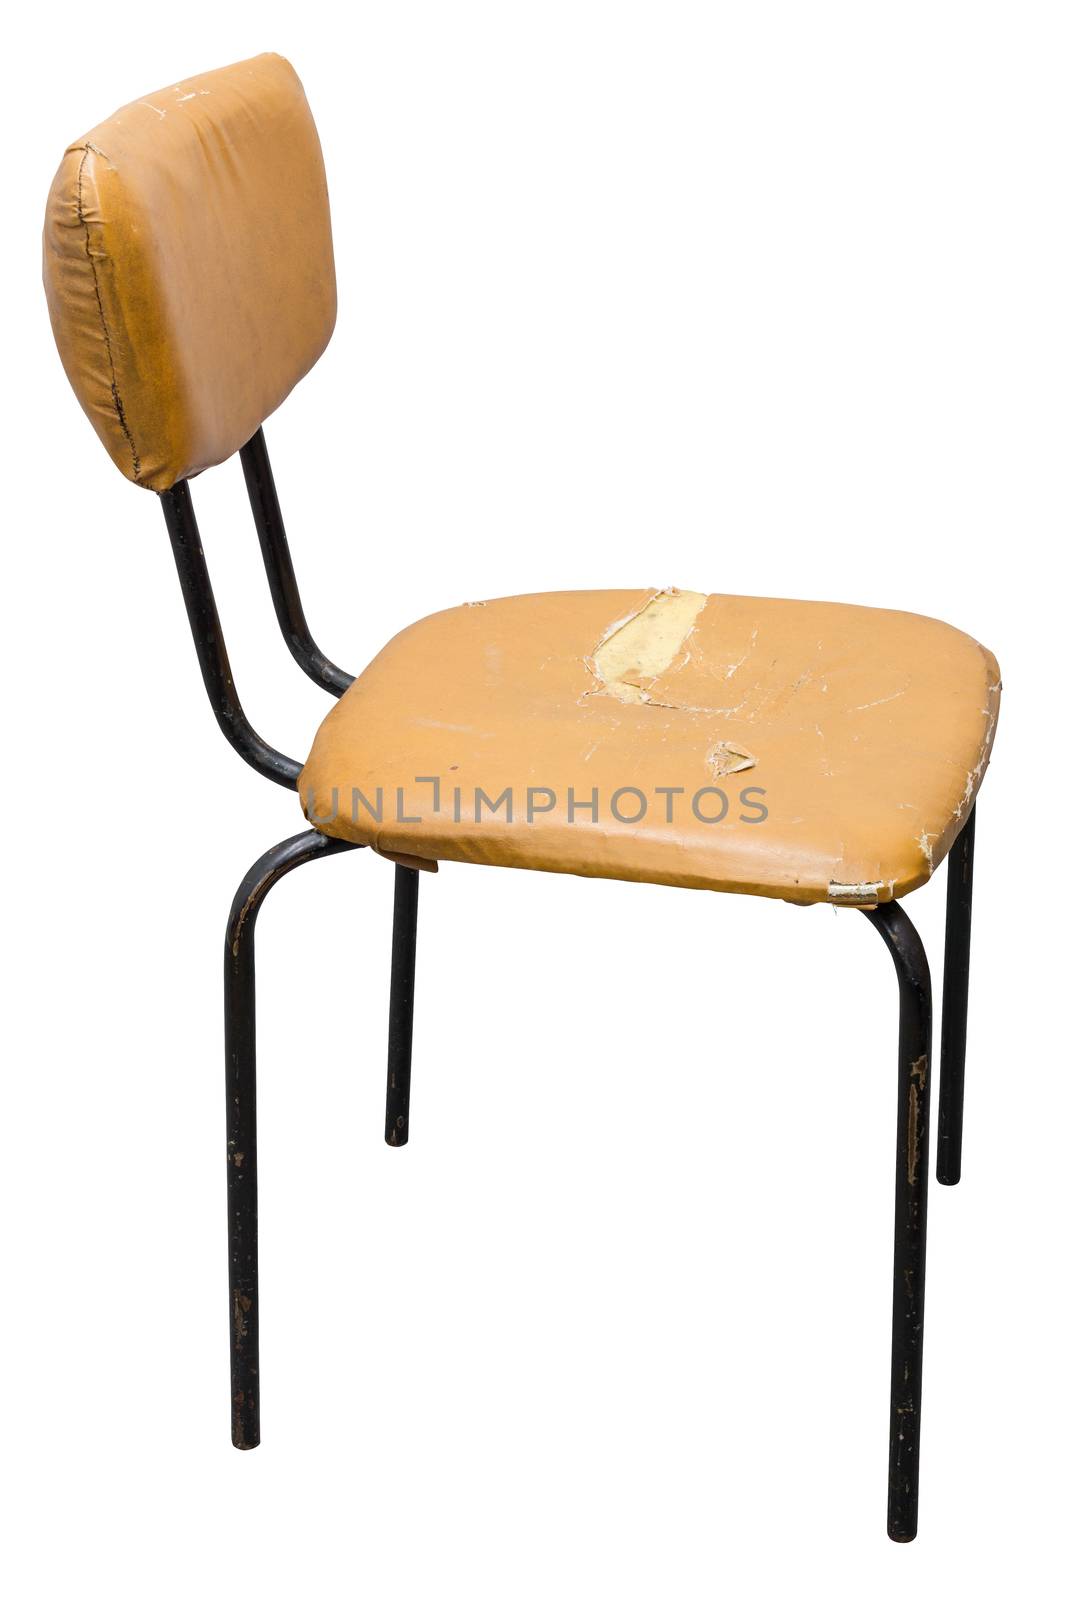 Old orange leatherette chair isolated on white background